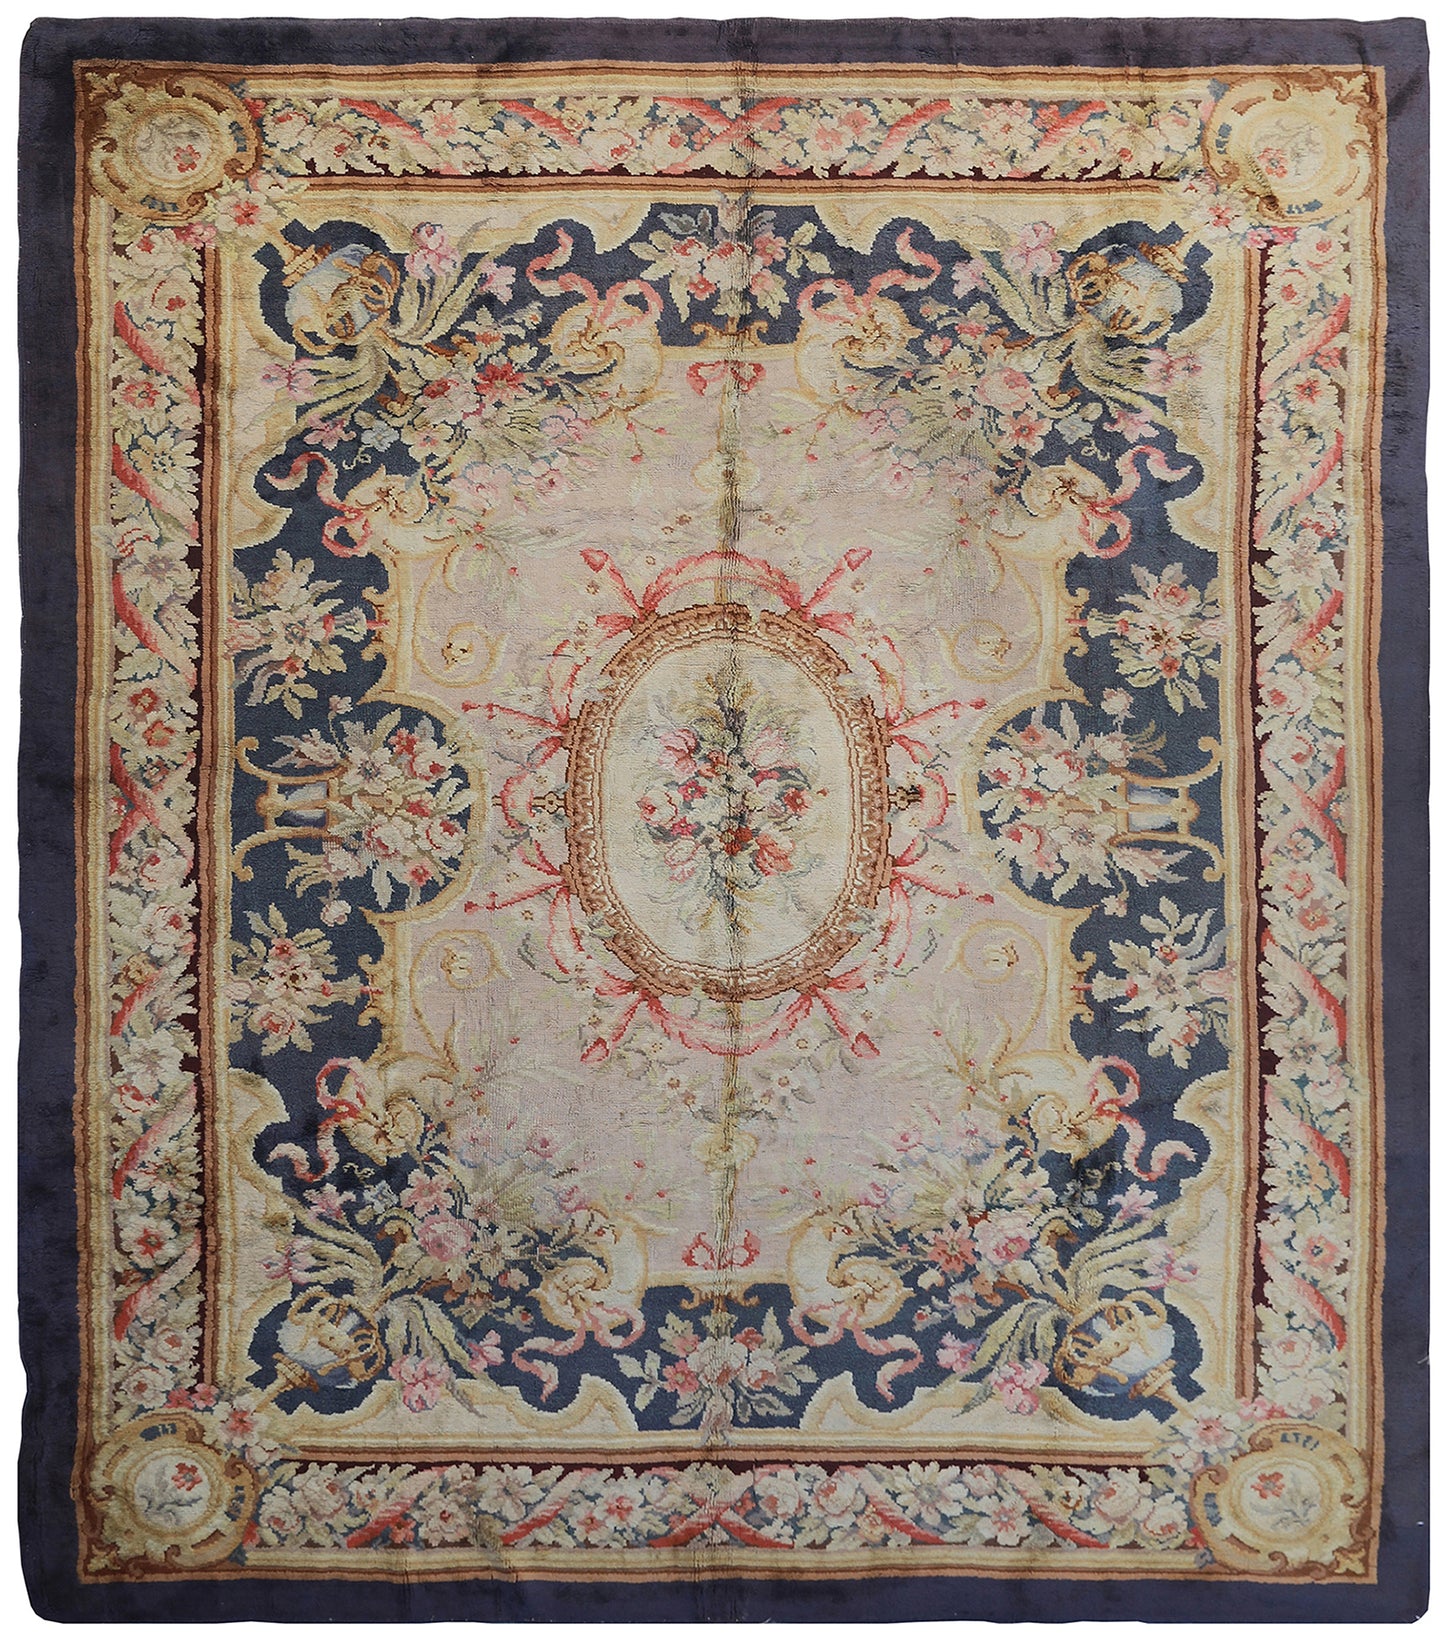 10x13 Antique French Savonnerie Piled Rug